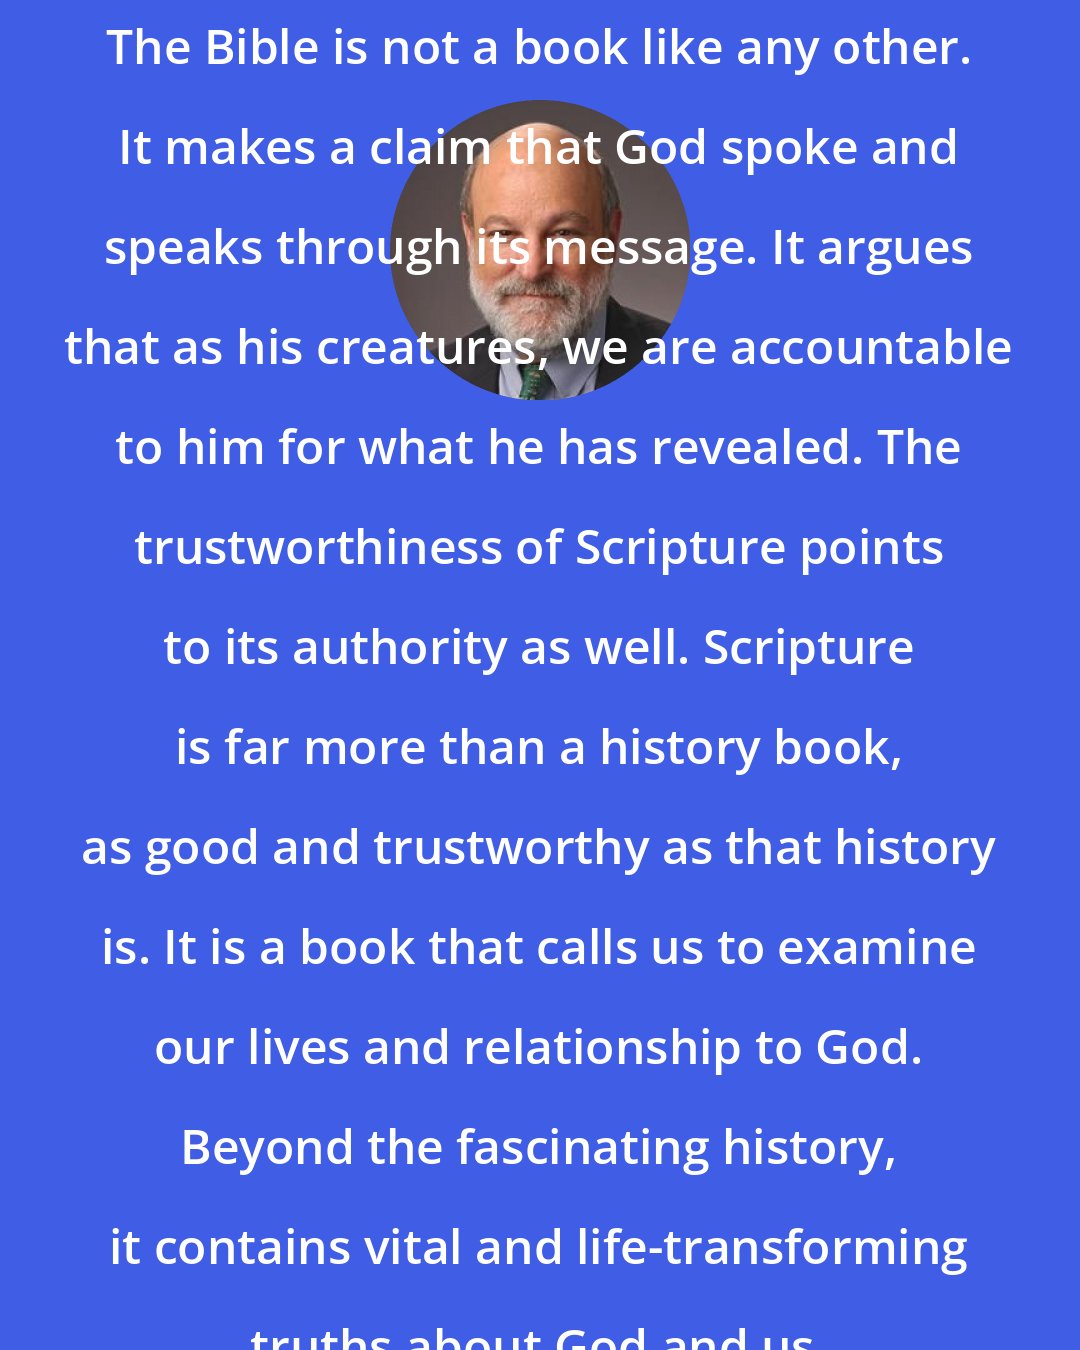 Darrell Bock: The Bible is not a book like any other. It makes a claim that God spoke and speaks through its message. It argues that as his creatures, we are accountable to him for what he has revealed. The trustworthiness of Scripture points to its authority as well. Scripture is far more than a history book, as good and trustworthy as that history is. It is a book that calls us to examine our lives and relationship to God. Beyond the fascinating history, it contains vital and life-transforming truths about God and us.